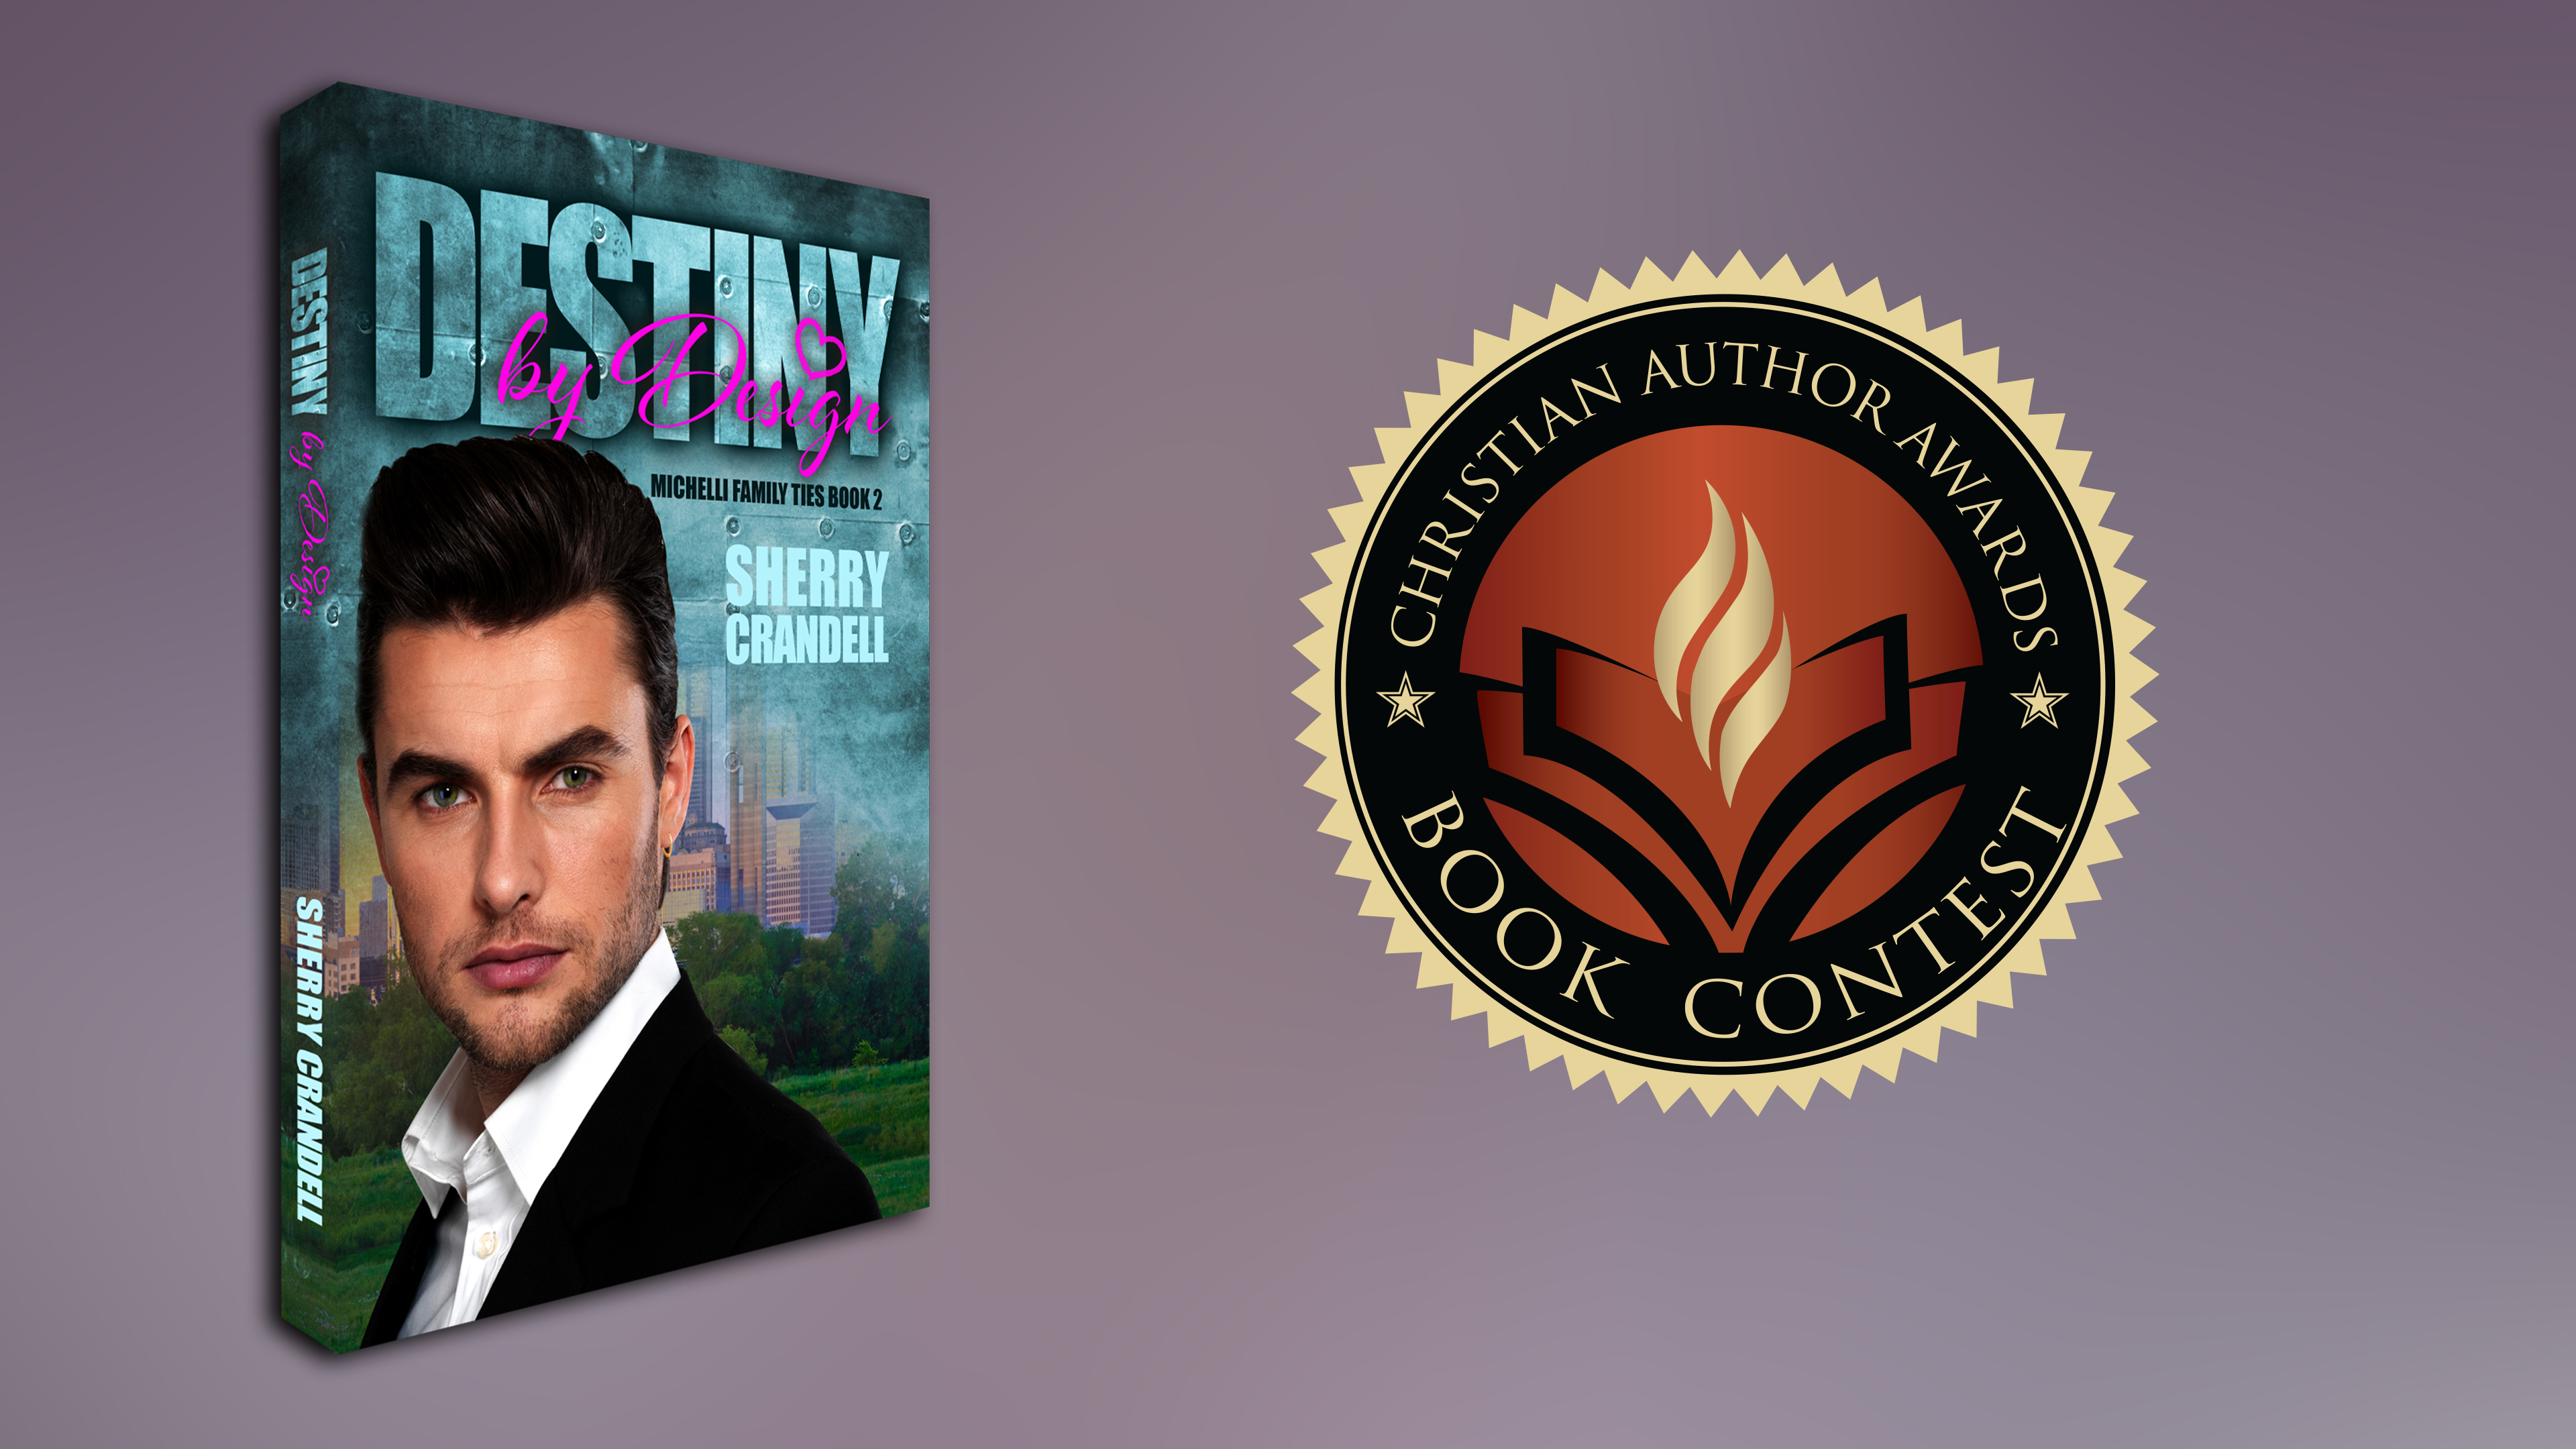 Destiny by Desing Silver Award from Reader's Favorite